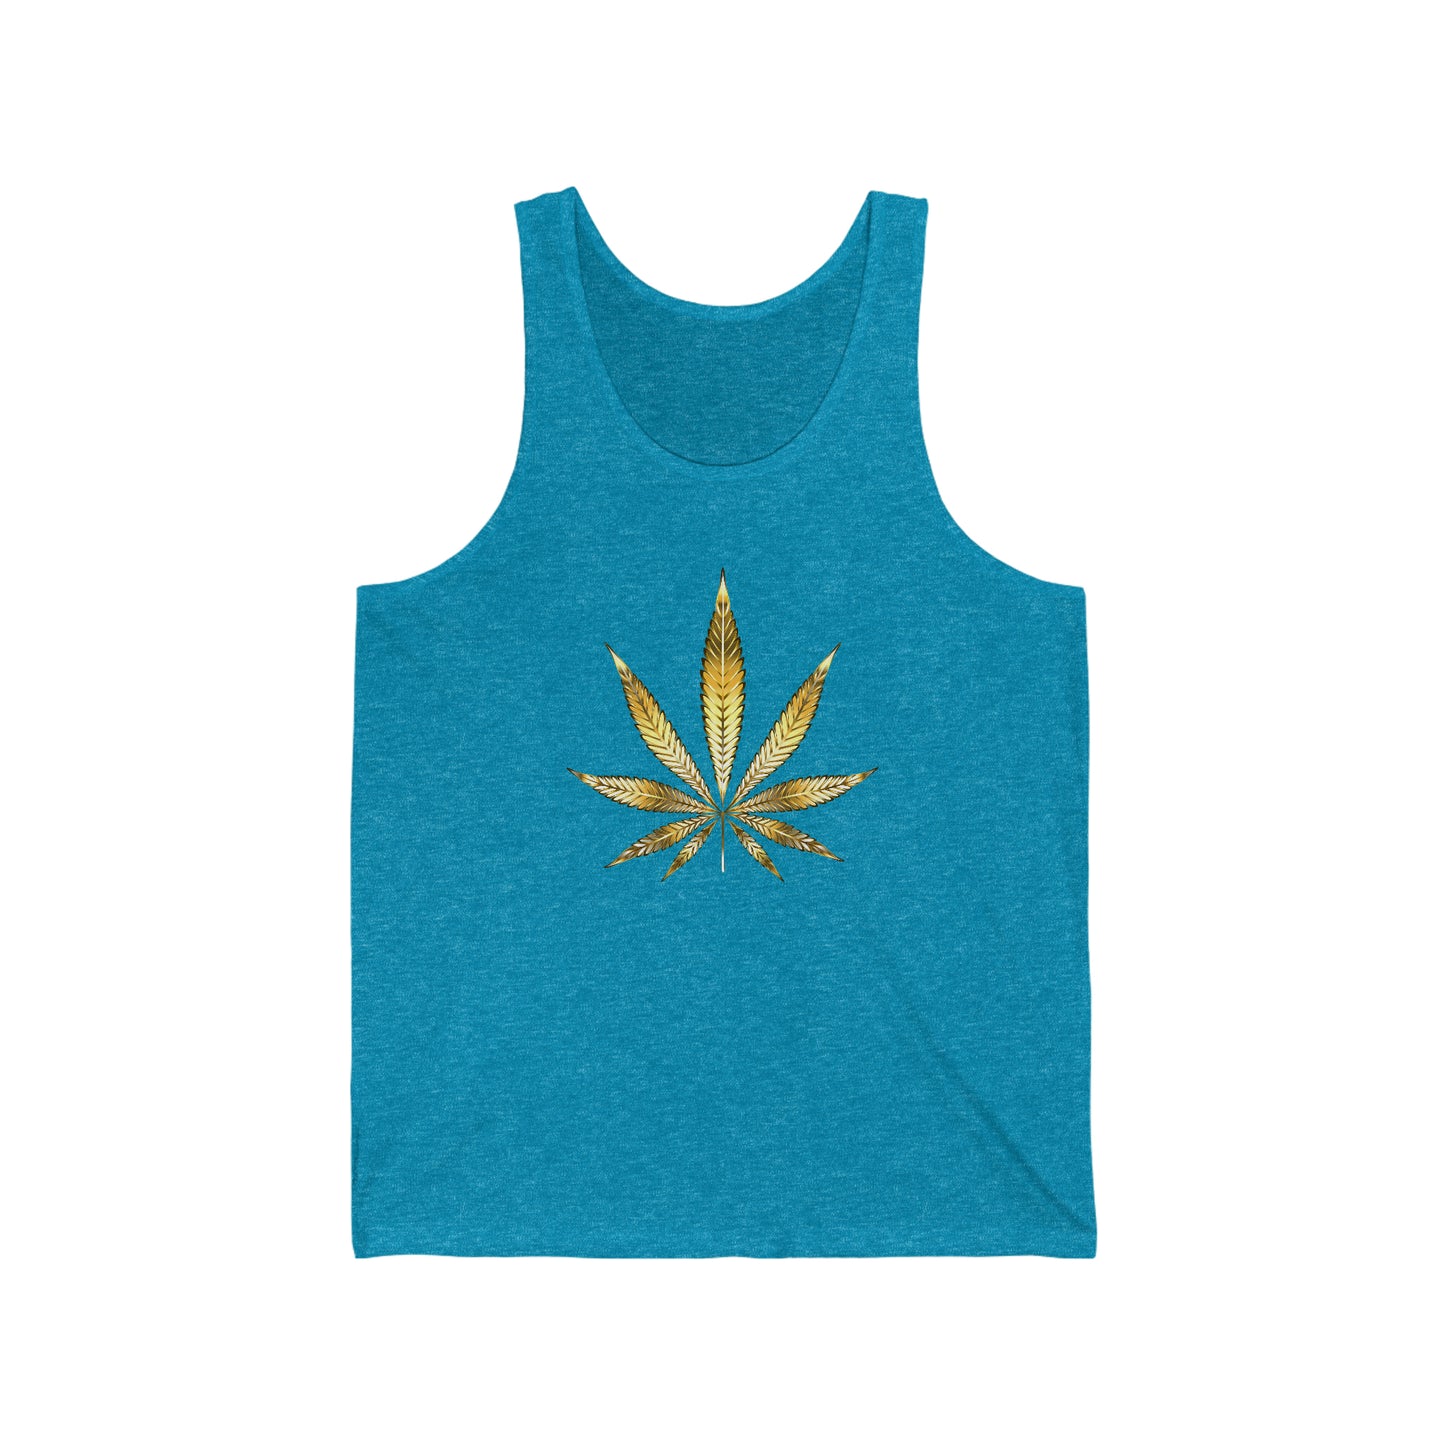 A light blue tank top jersey with a bright gold weed leaf in the center